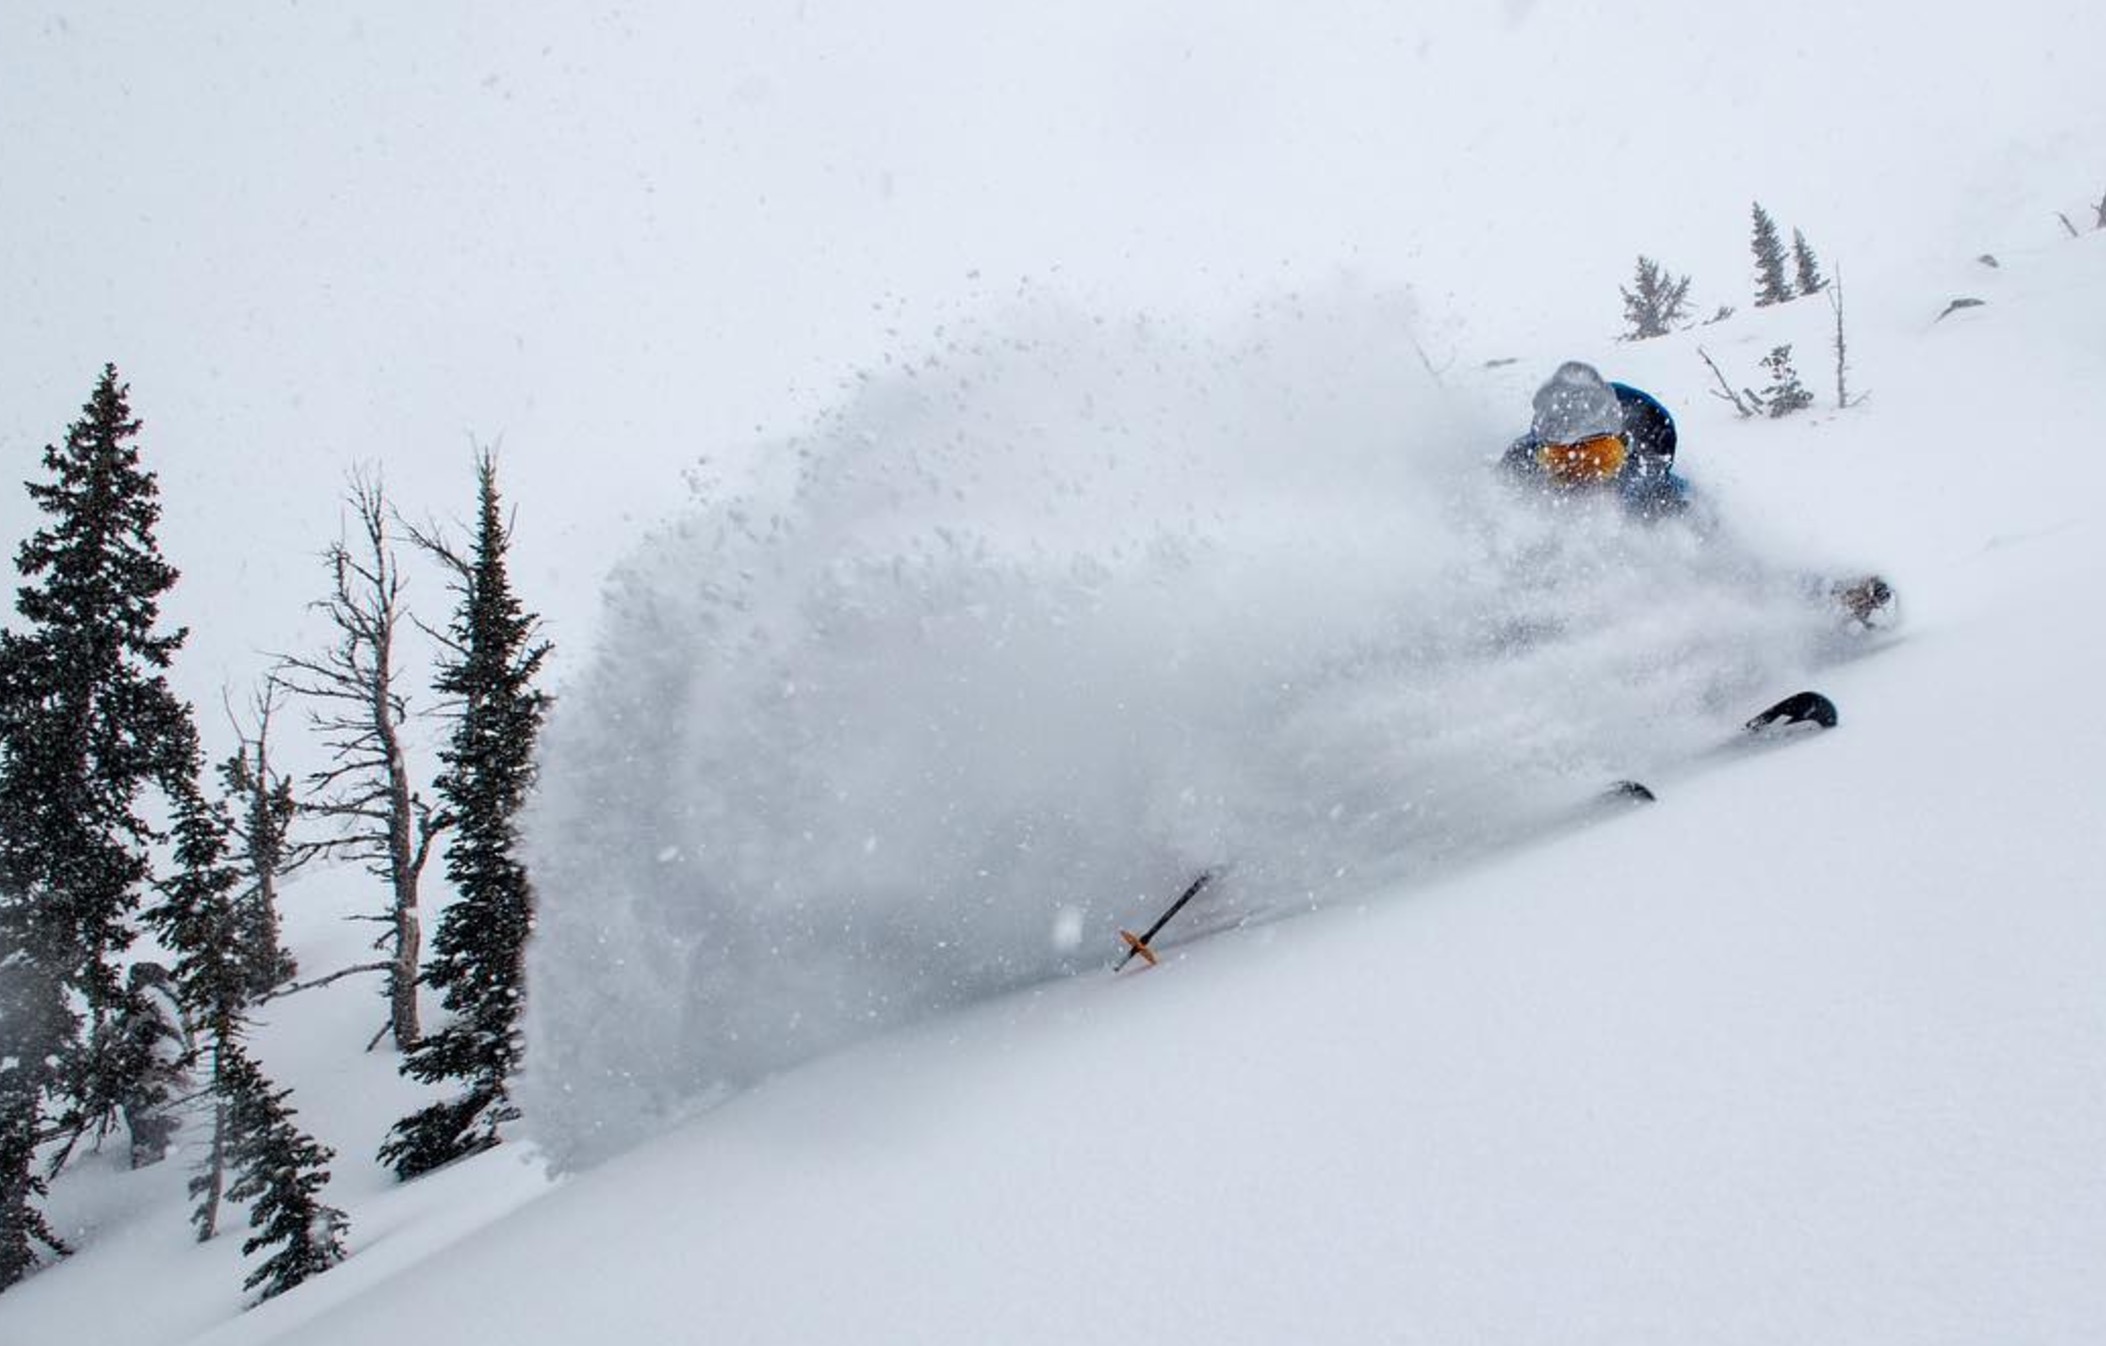 Jackson Hole Wraps Up Ski Season With 502″ of Snow | Unofficial Networks